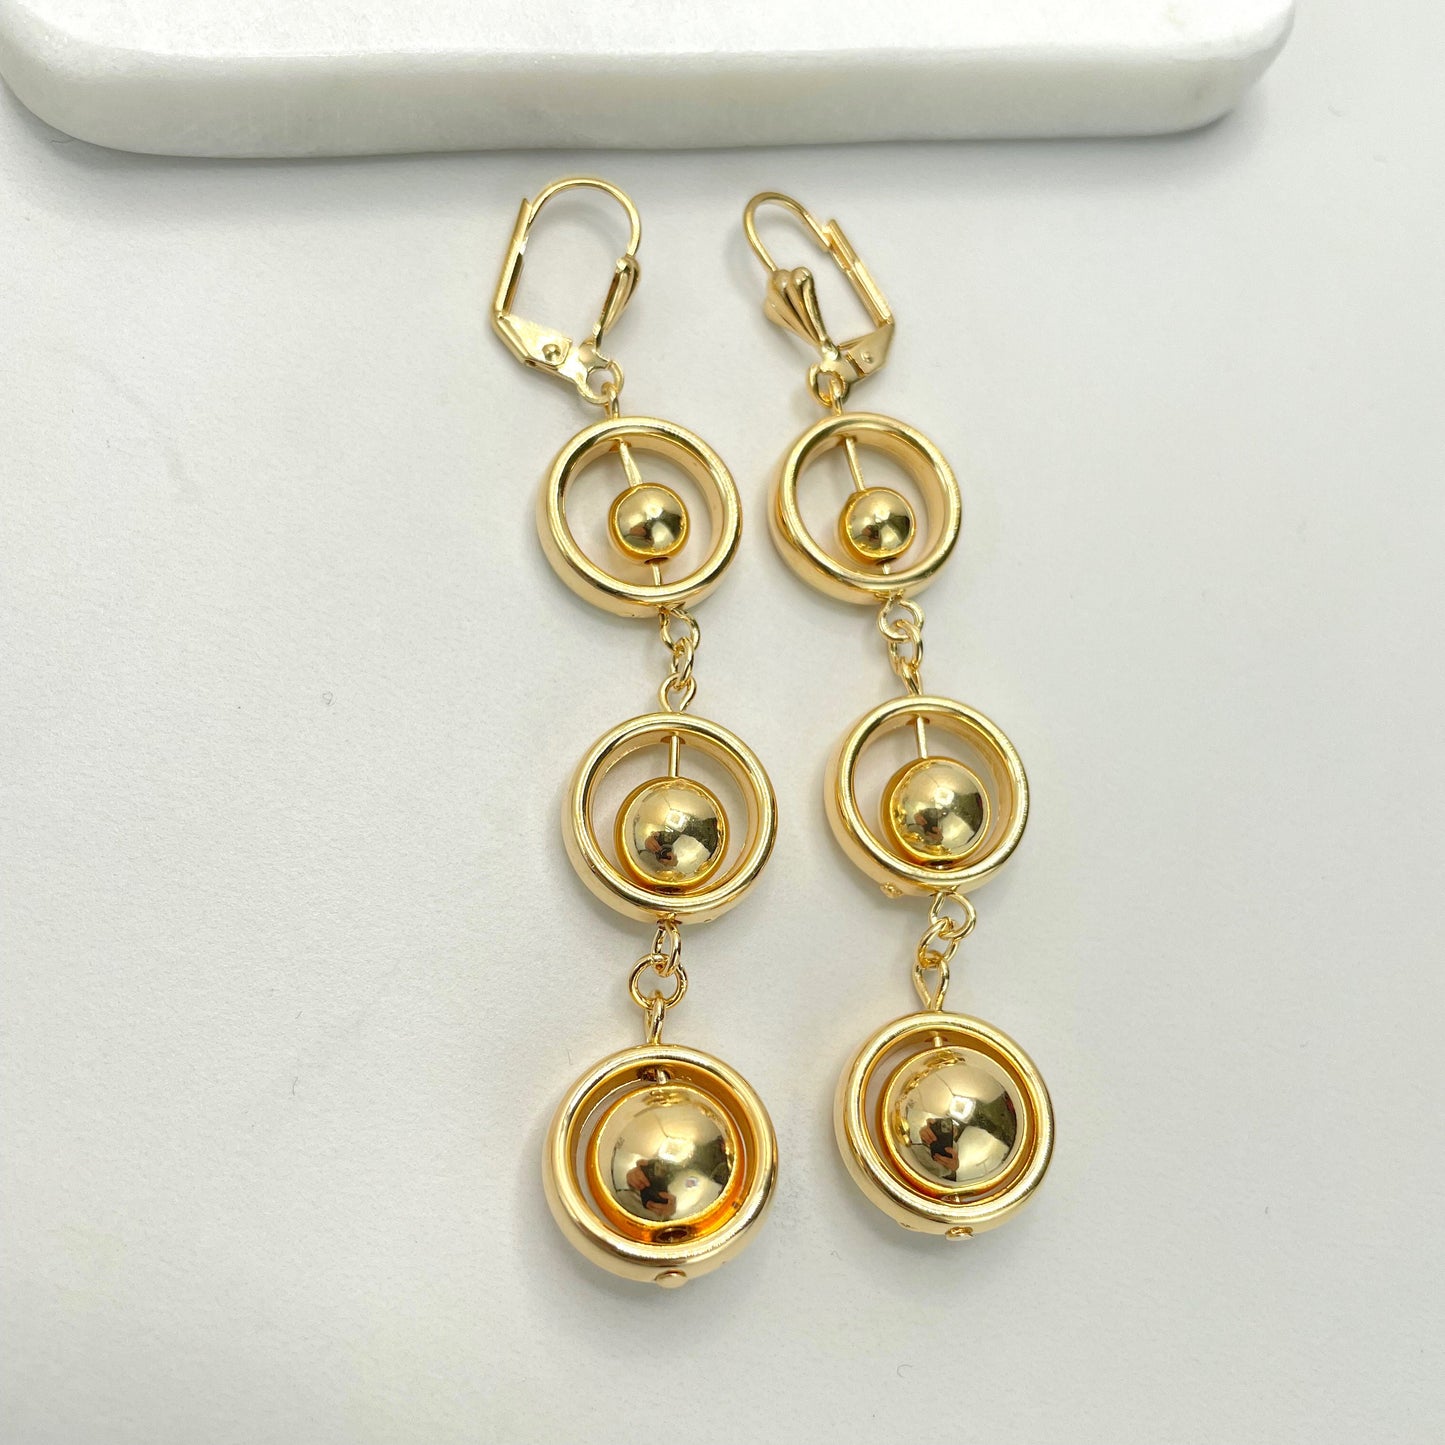 18k Gold Filled 78mm Dangle Drop Earrings with Gold Balls Wholesale Jewelry Making Supplies